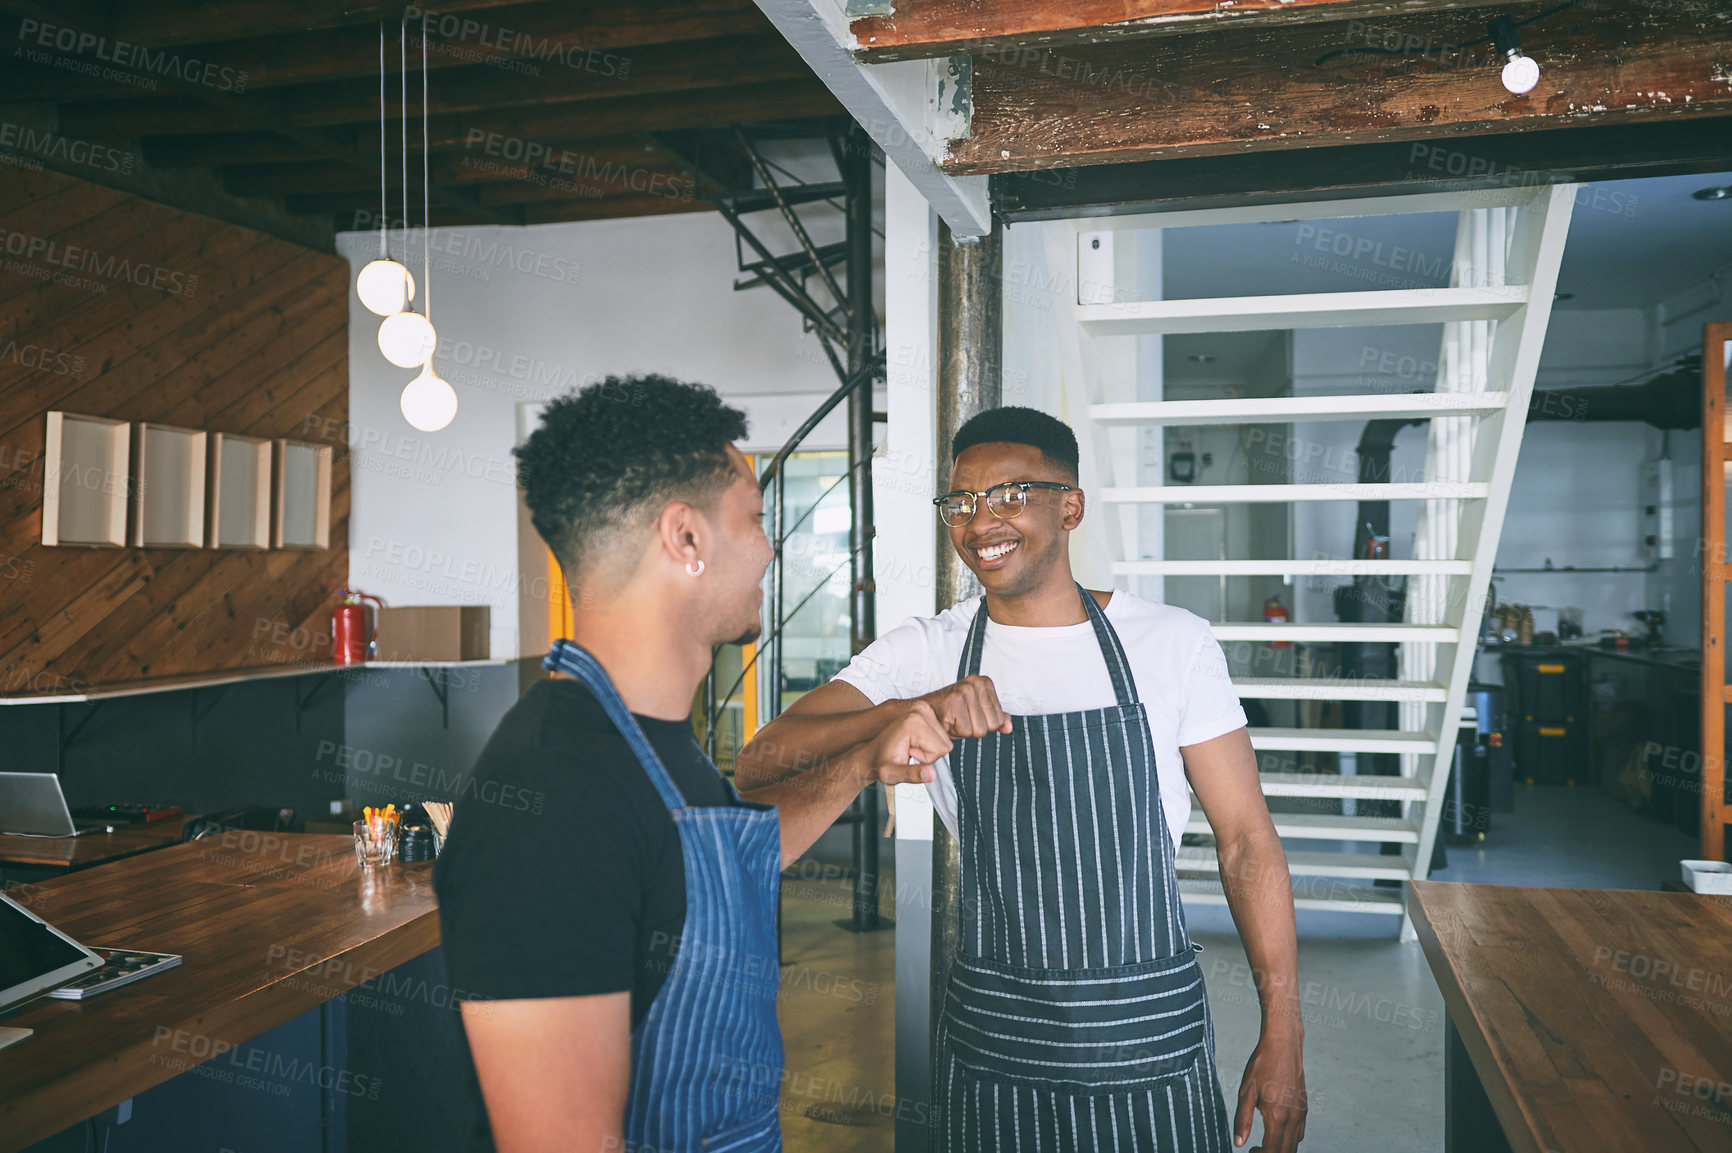 Buy stock photo Shot of two confident young men giving each other a fist bump while working in a cafe